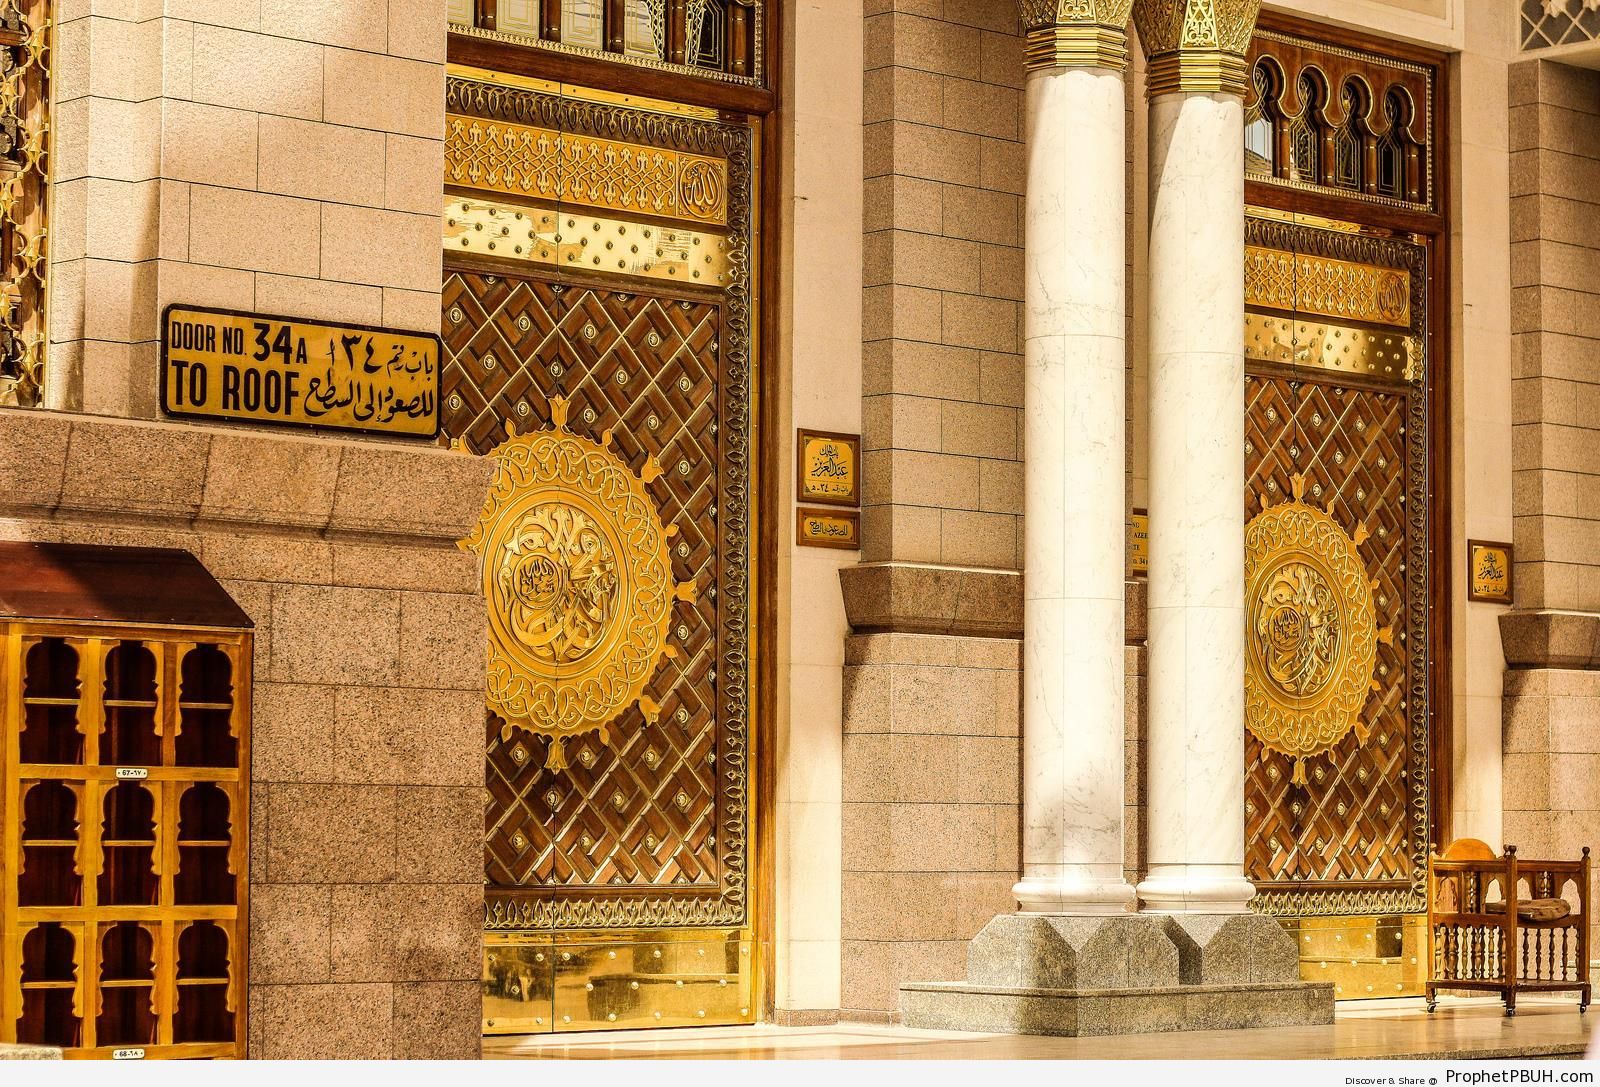 Entrances at the Prophet-s Mosque in Madinah, Saudi Arabia - Al-Masjid an-Nabawi (The Prophets Mosque) in Madinah, Saudi Arabia -Picture